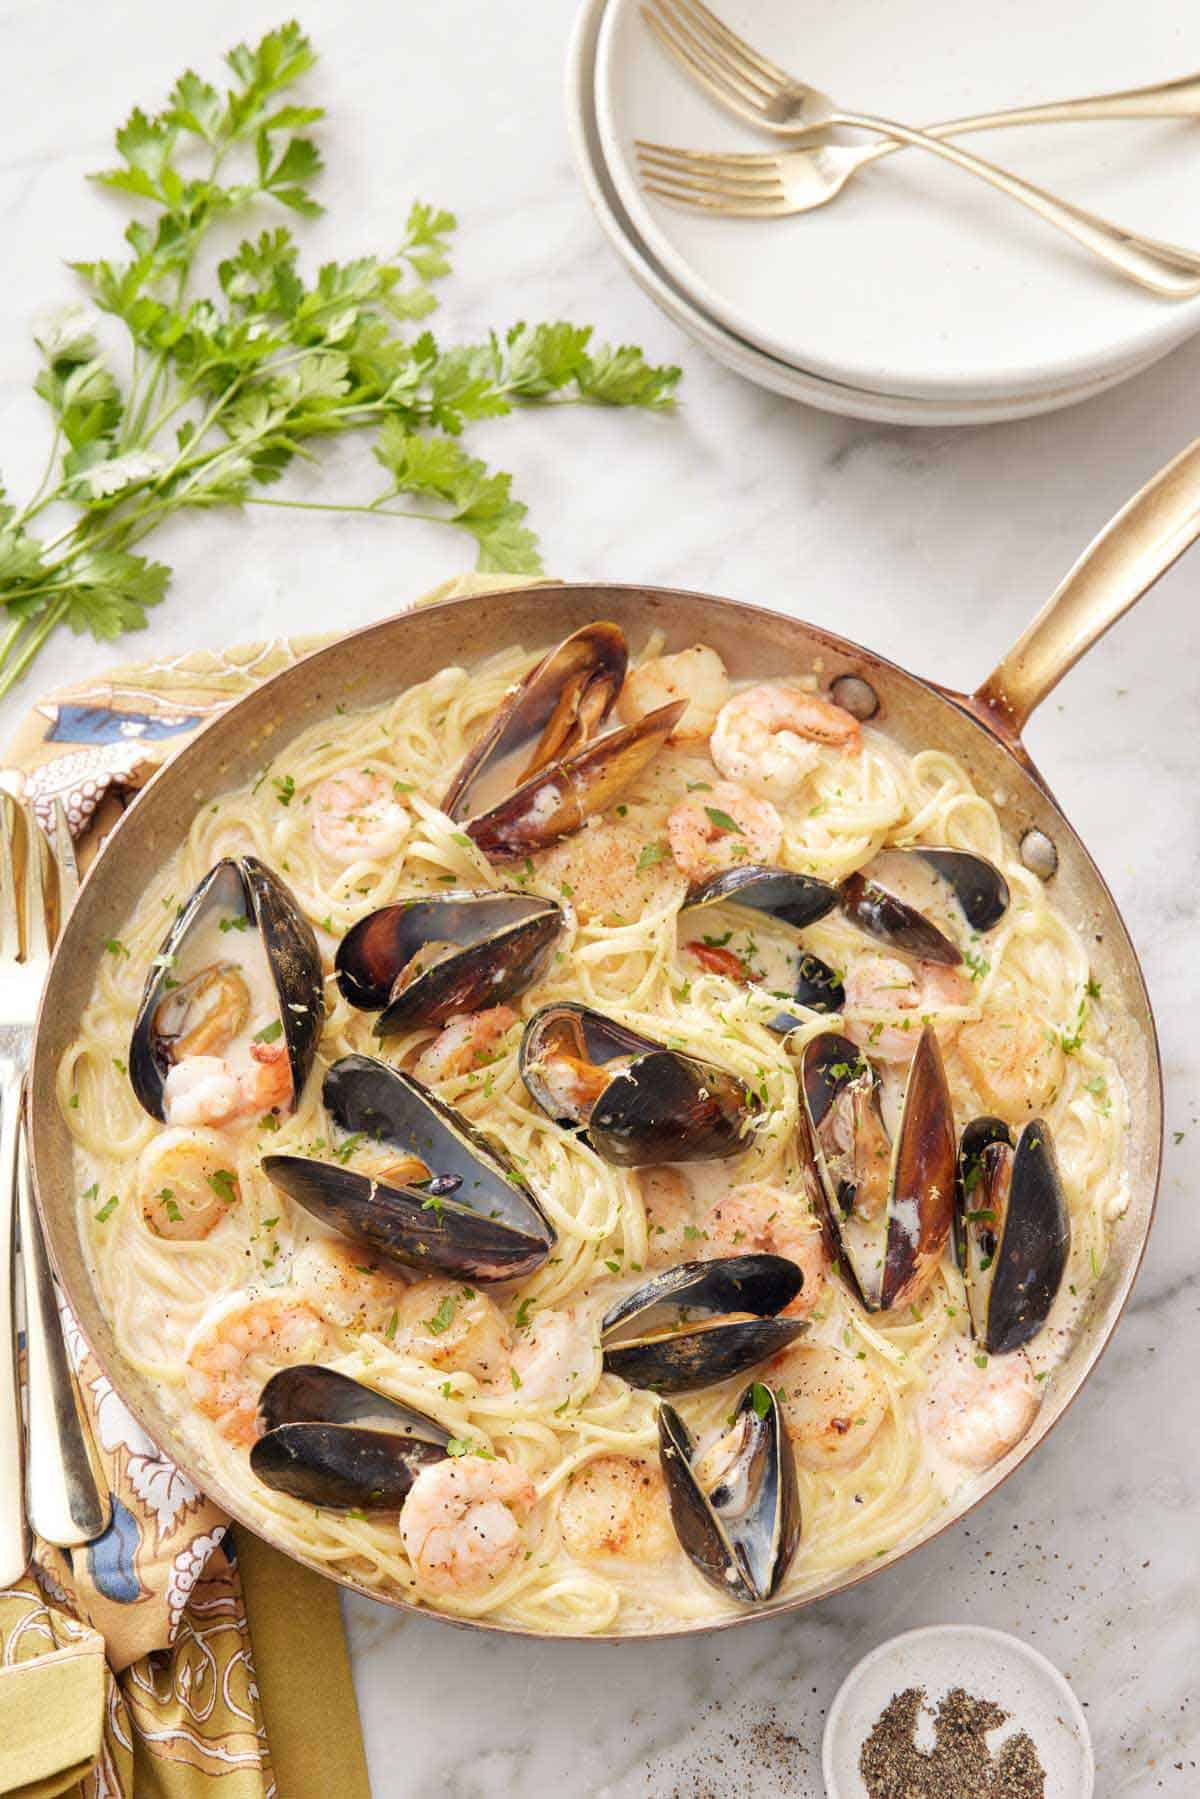 A skillet of seafood pasta with a stack of plates and forks behind it along with parsley.